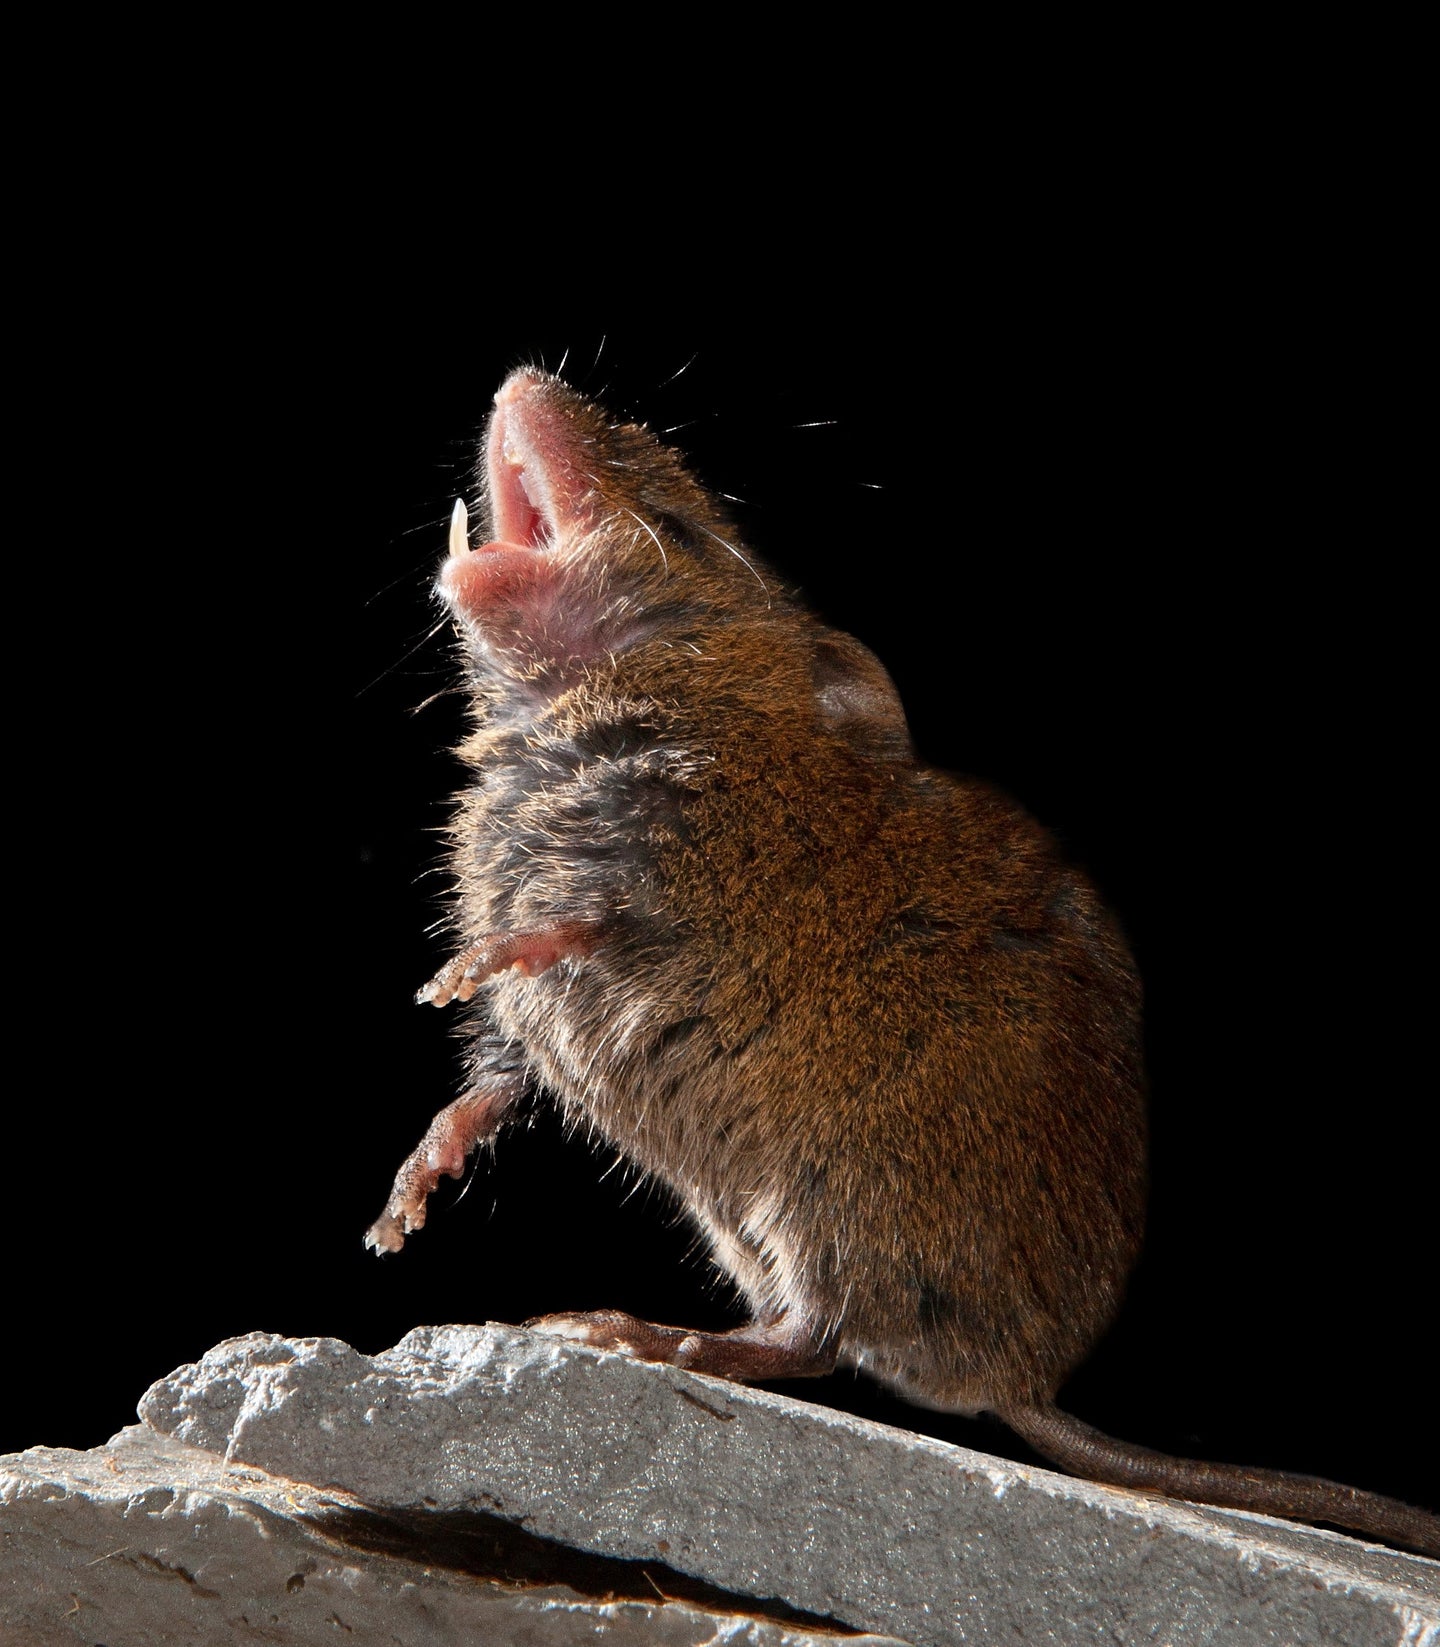 A singing mouse on a rock